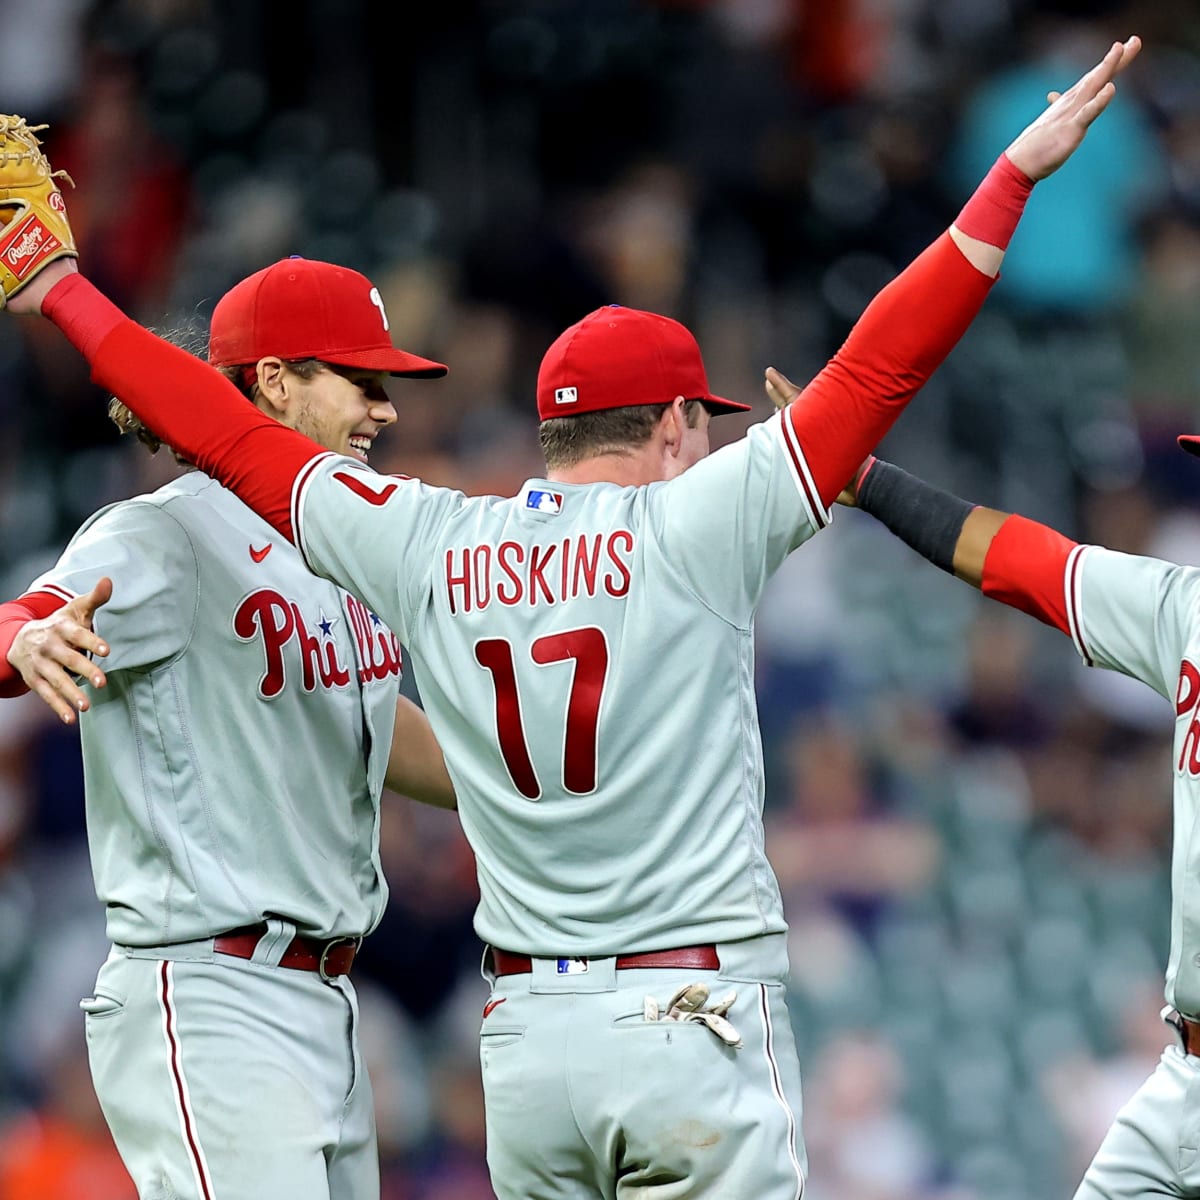 Phillies down Astros for 1st playoff berth since 2011